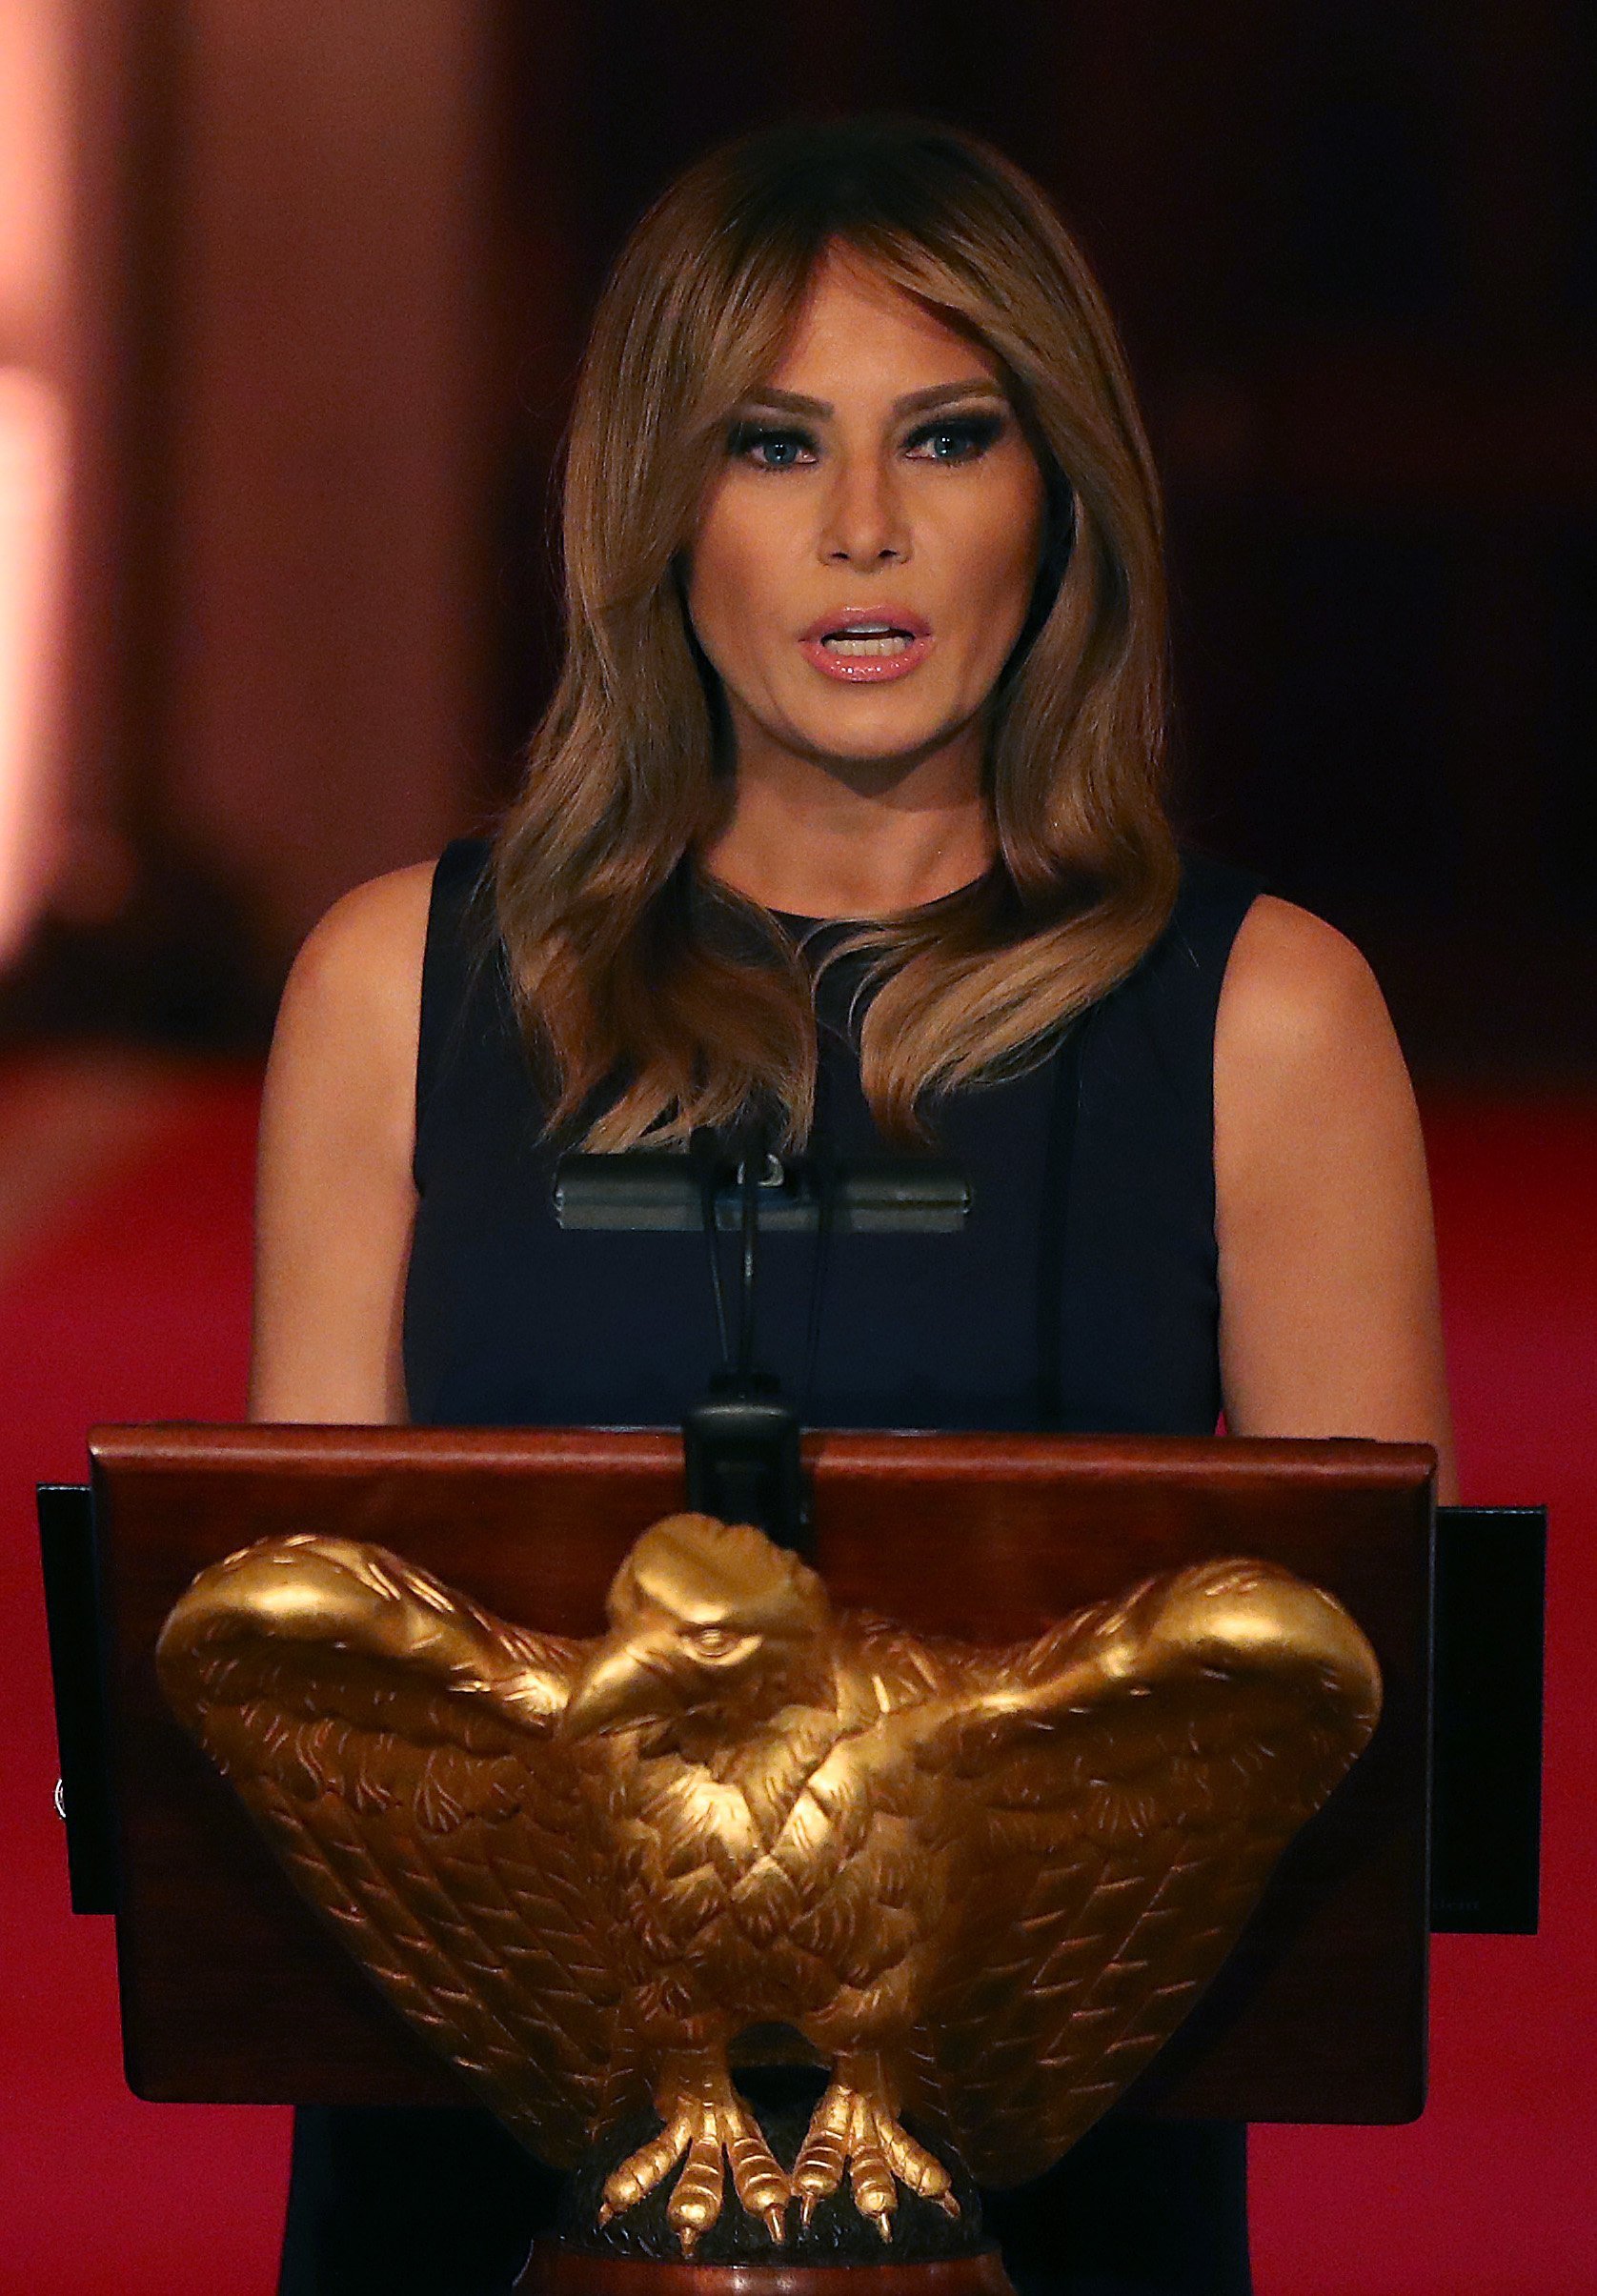 Melania Trump delivering a speech during the White House Historical Association Dinner in the East Room of the White House | Photo: Getty Images